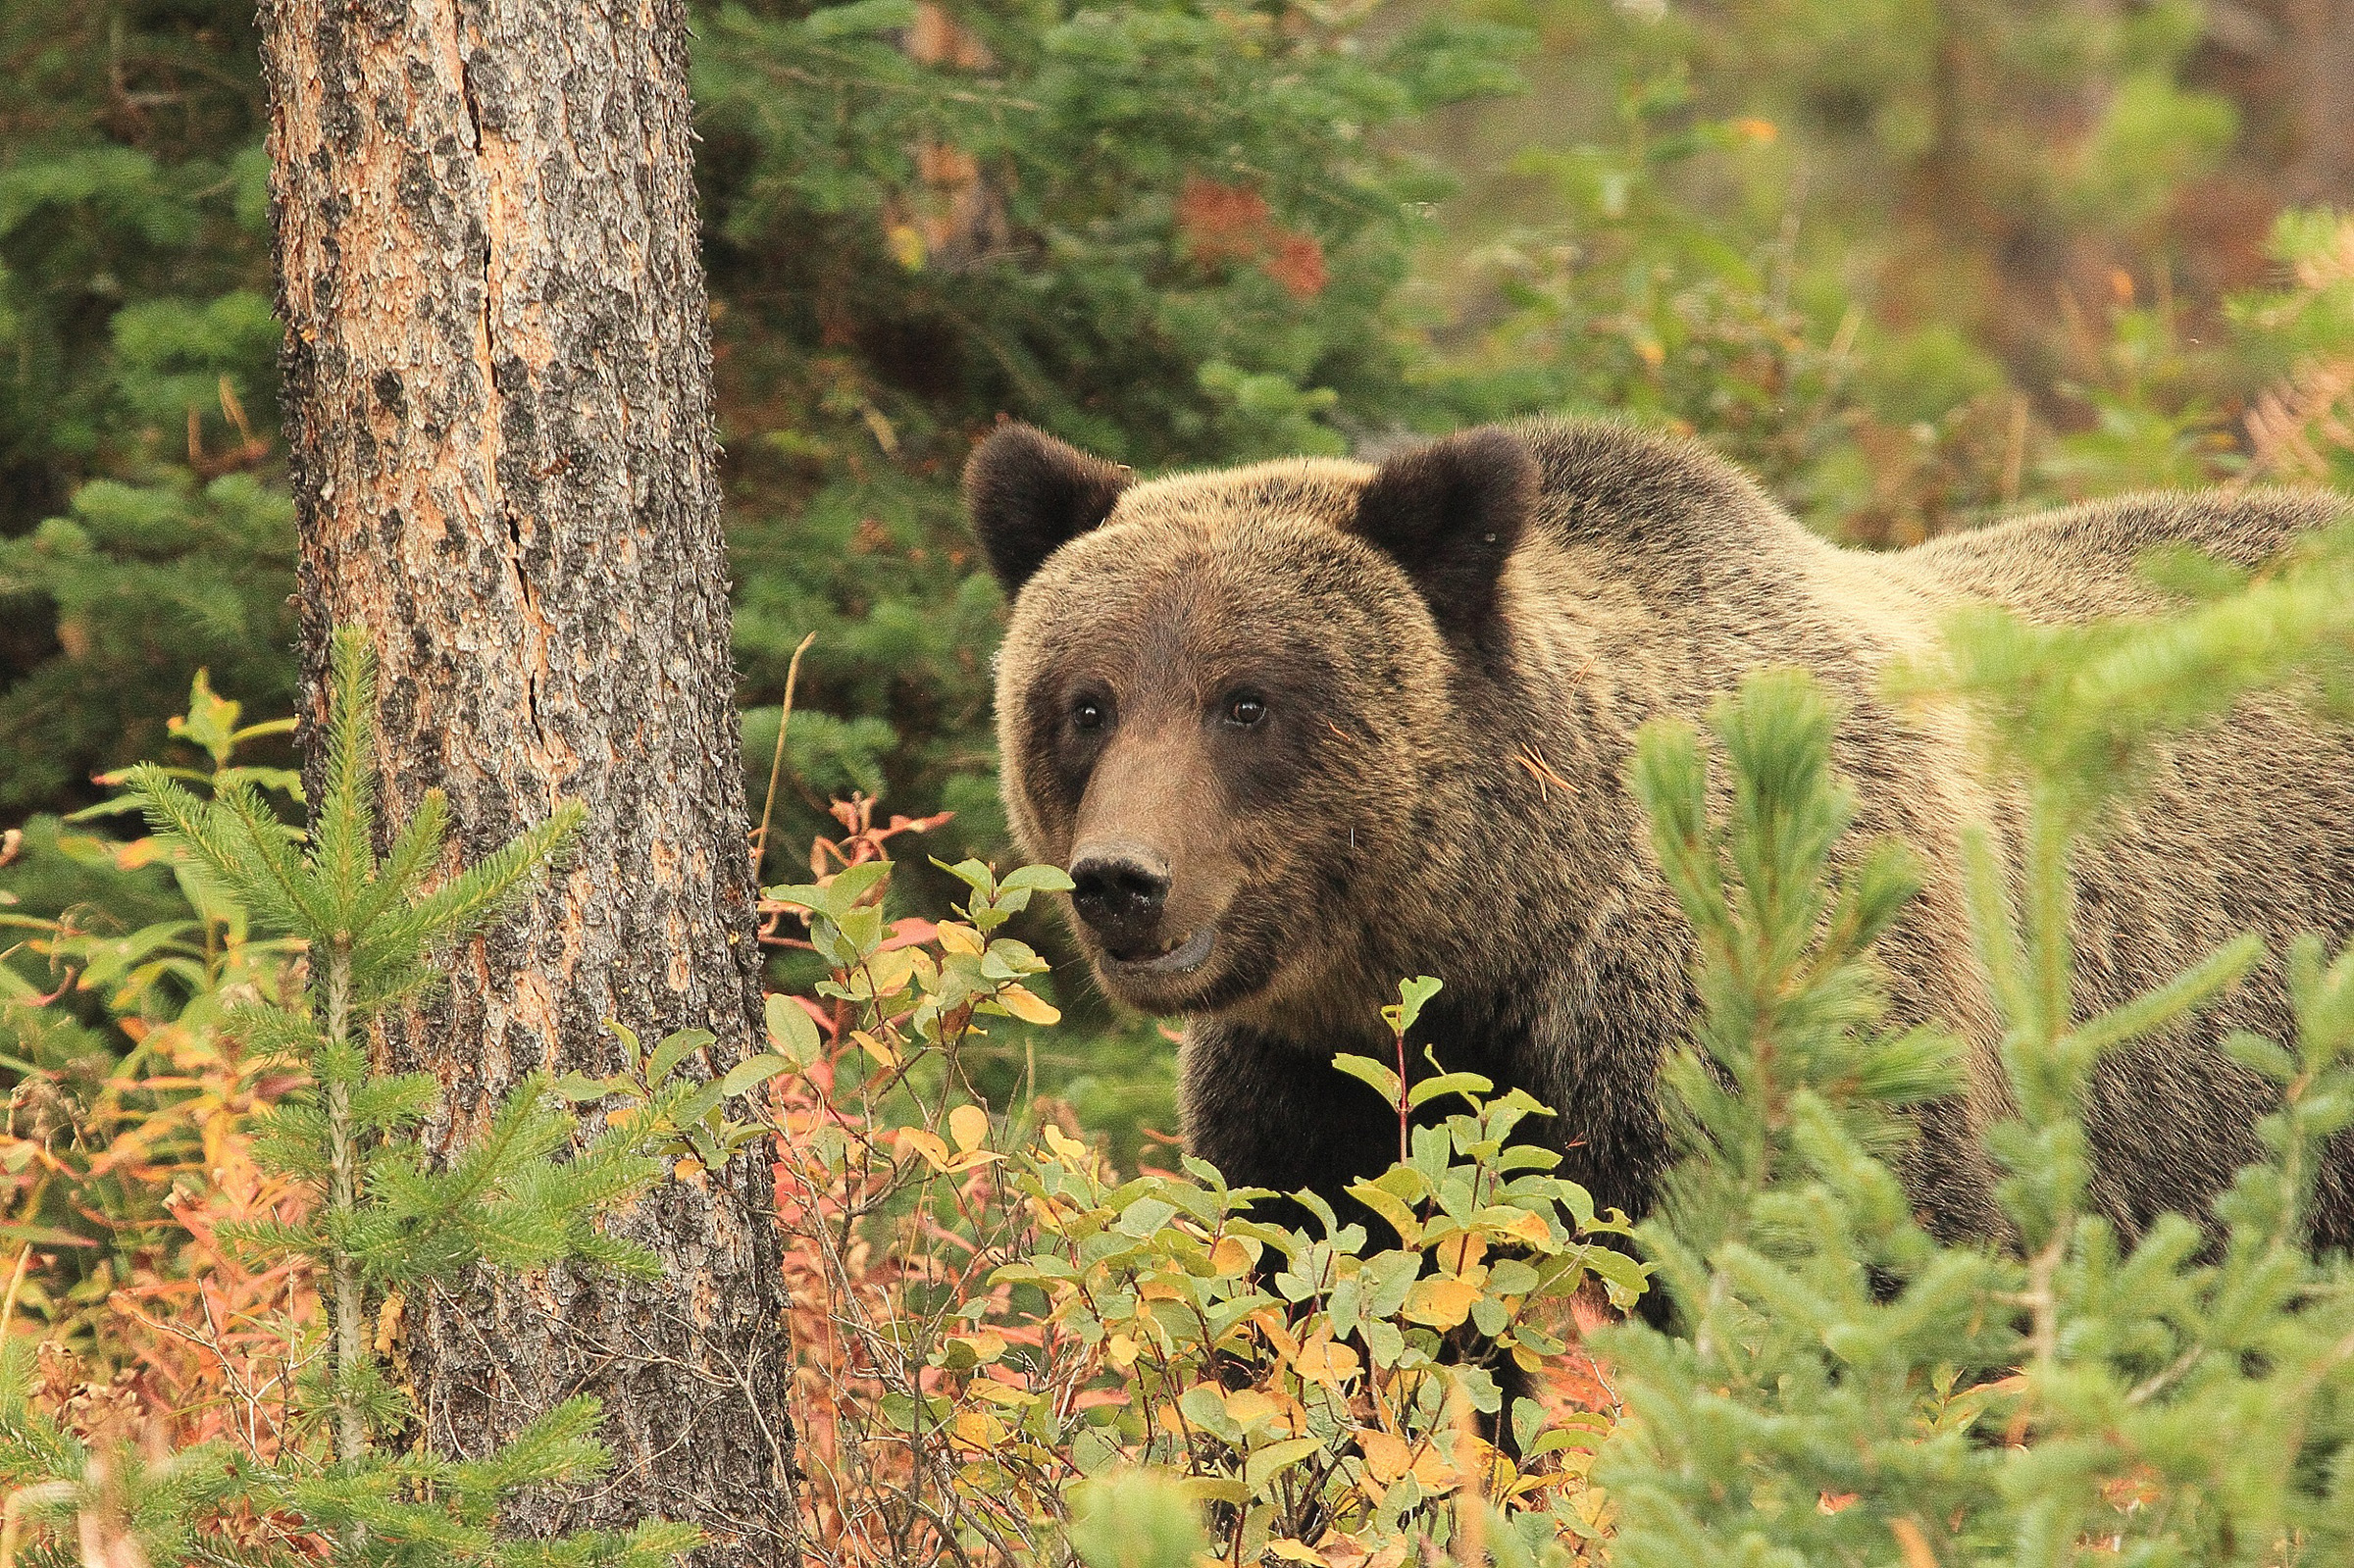 Grizzly bears (Ursus arctos), like this one photographed on the Bridger-Teton National Forest in Wyoming, require large areas to roam and tend to favor mesic, meadow and shrub habitats where there is ample food. (Credit: U.S. Forest Service)